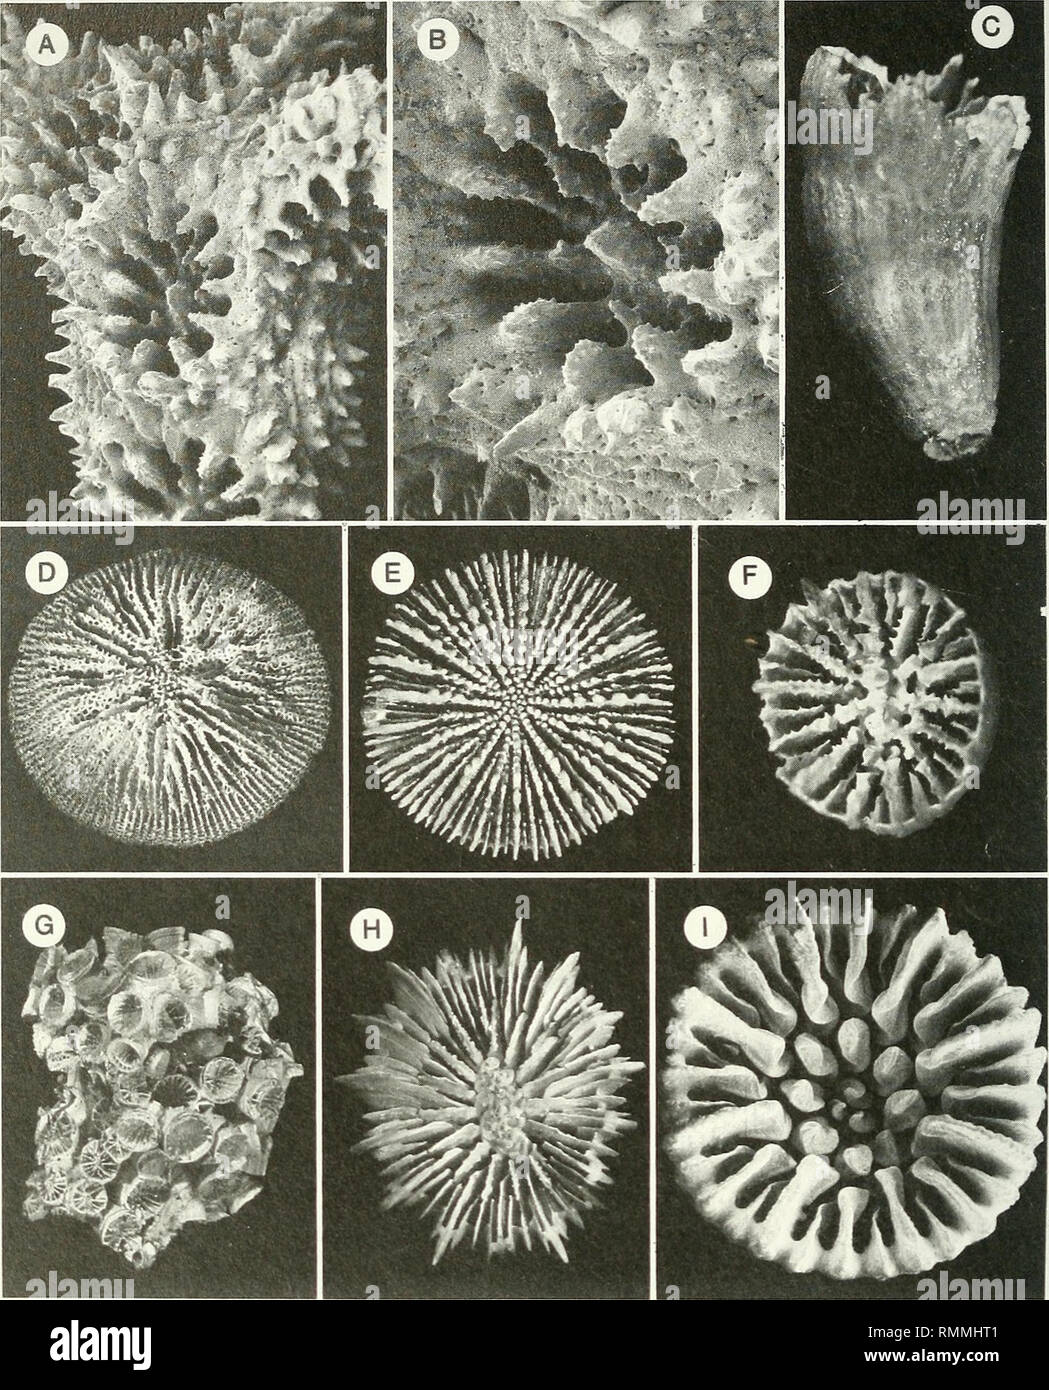 . Annals of the South African Museum = Annale van die Suid-Afrikaanse Museum. Natural history. 238 ANNALS OF THE SOUTH AFRICAN MUSEUM. Fig. 3. A-B. Madracis sp. A, V-2697, IOM, branch and calicular views. A x 10, B x 20. C, F. Caryophyllia sp. cf. C. cornuformis, V-2626, IOM, lateral and calicular views. C x 5,8, F x 6,7. D. Letepsammia formosissima, V-2608, USNM 91506, calice. x 1,3. E. Anthemiphyllia dentata, V-2804, IOM, calice. x 1,4. G. Culicia sp. cf. C. natalensis, AB-421A, USNM 91515, colony, x 0,9. H. Caryophyllia ambrosia ambrosia, V-2668, IOM, calice. x 1,3. I. Caryophyllia rugosa,  Stock Photo